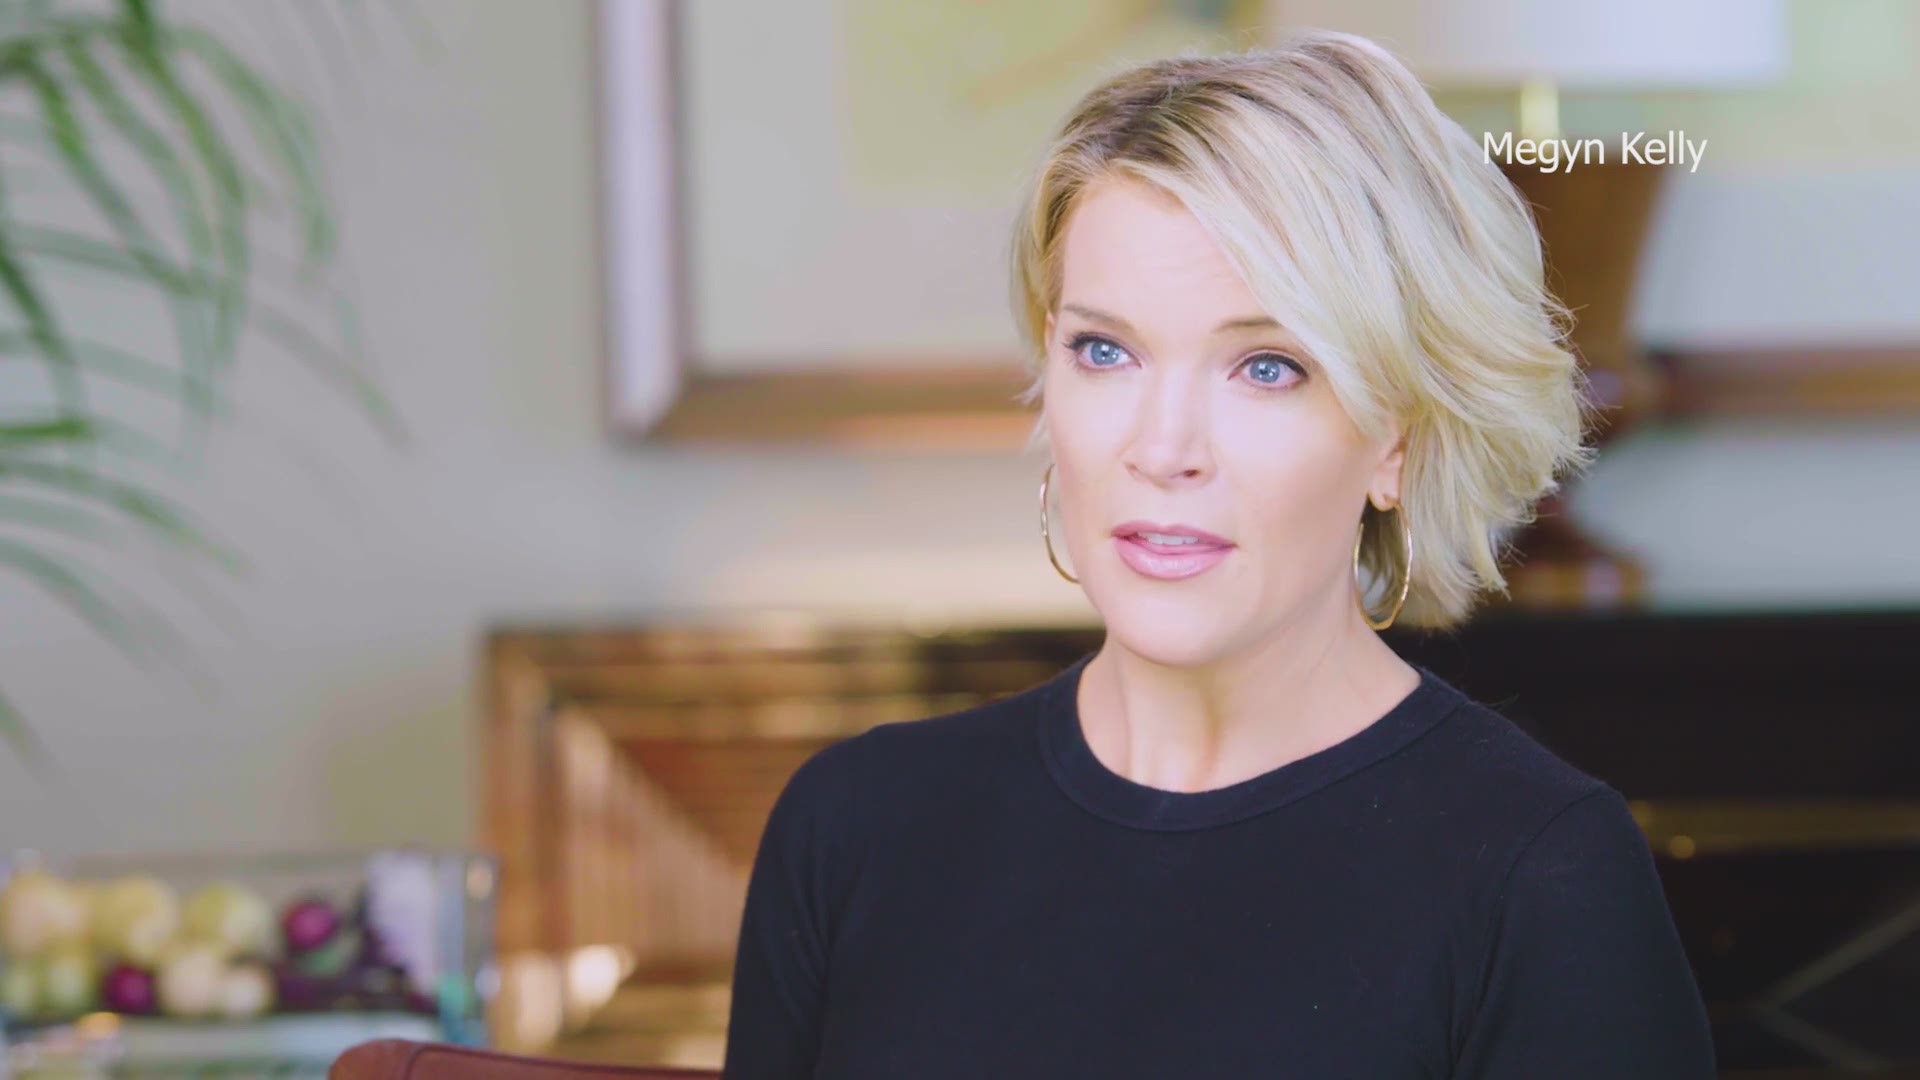 Tara Reade, who has accused presidential nominee Joe Biden of sexual assault, tells Megyn Kelly why she decided to come forward.